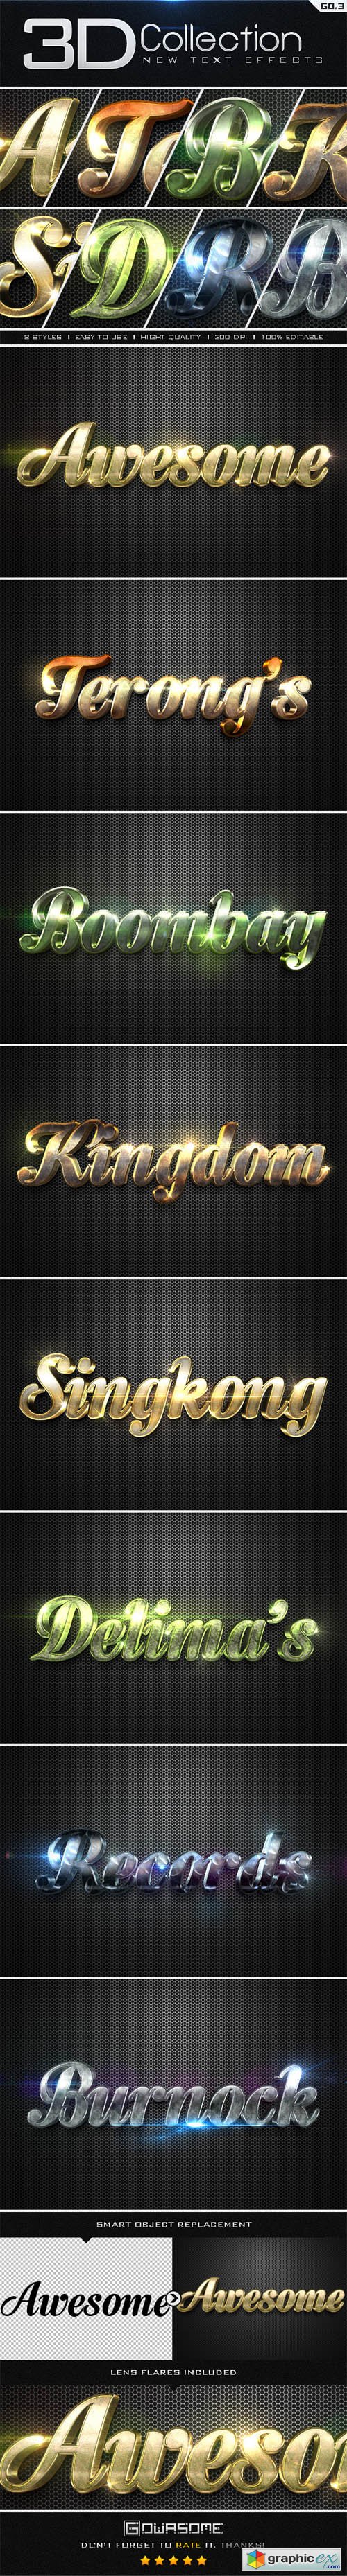 New 3D Collection Text Effects GO.3